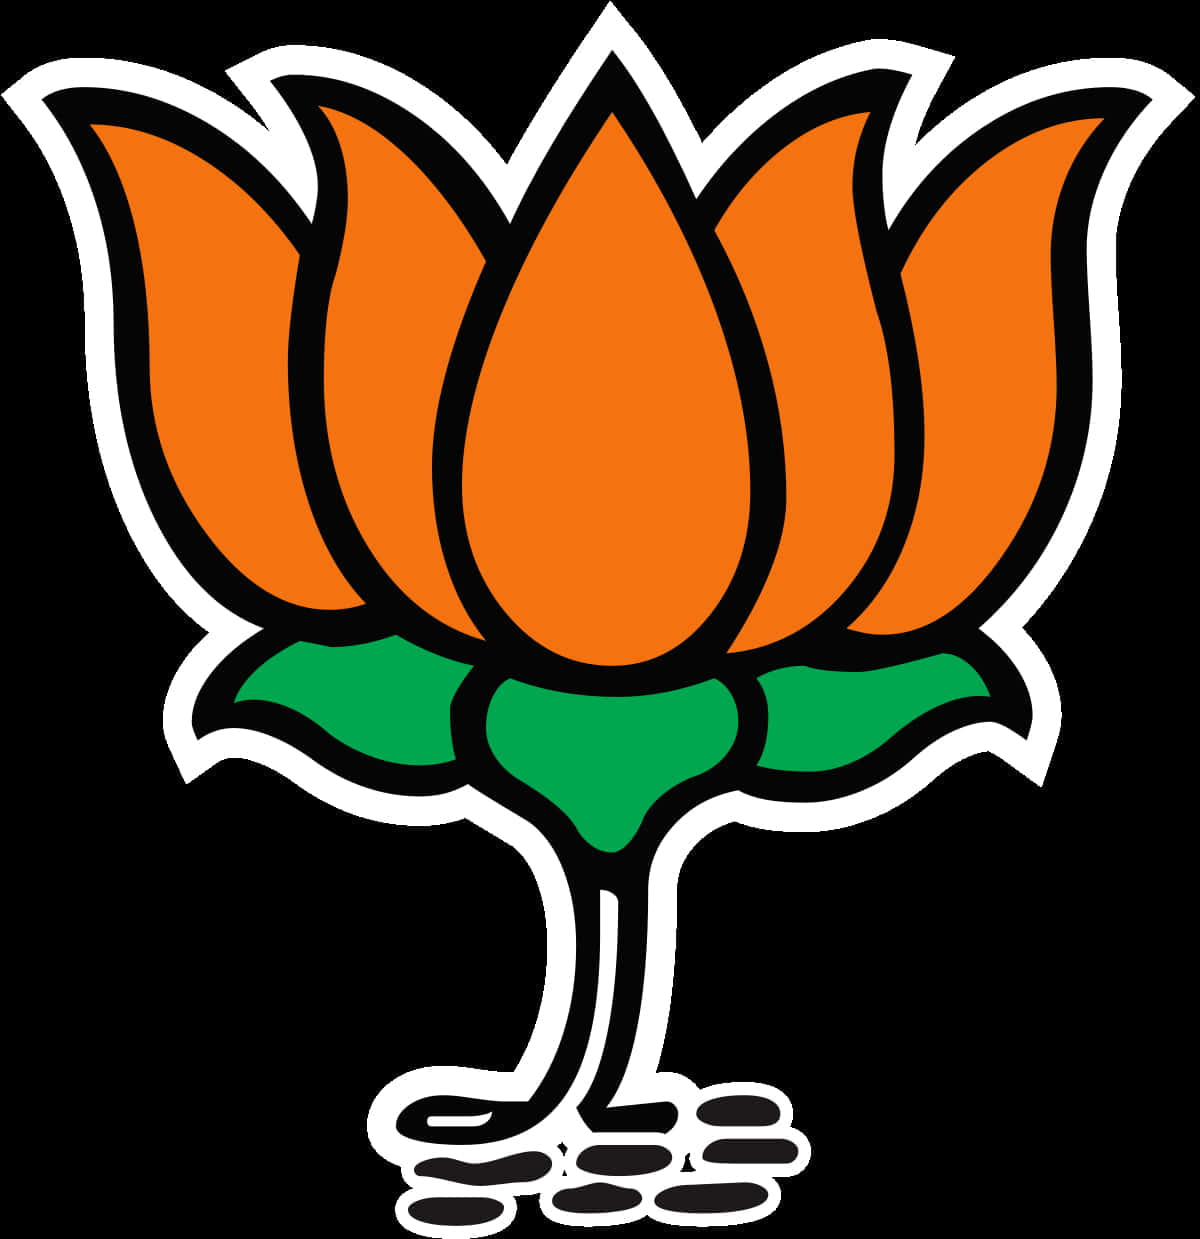 Building a better and united India with BJP